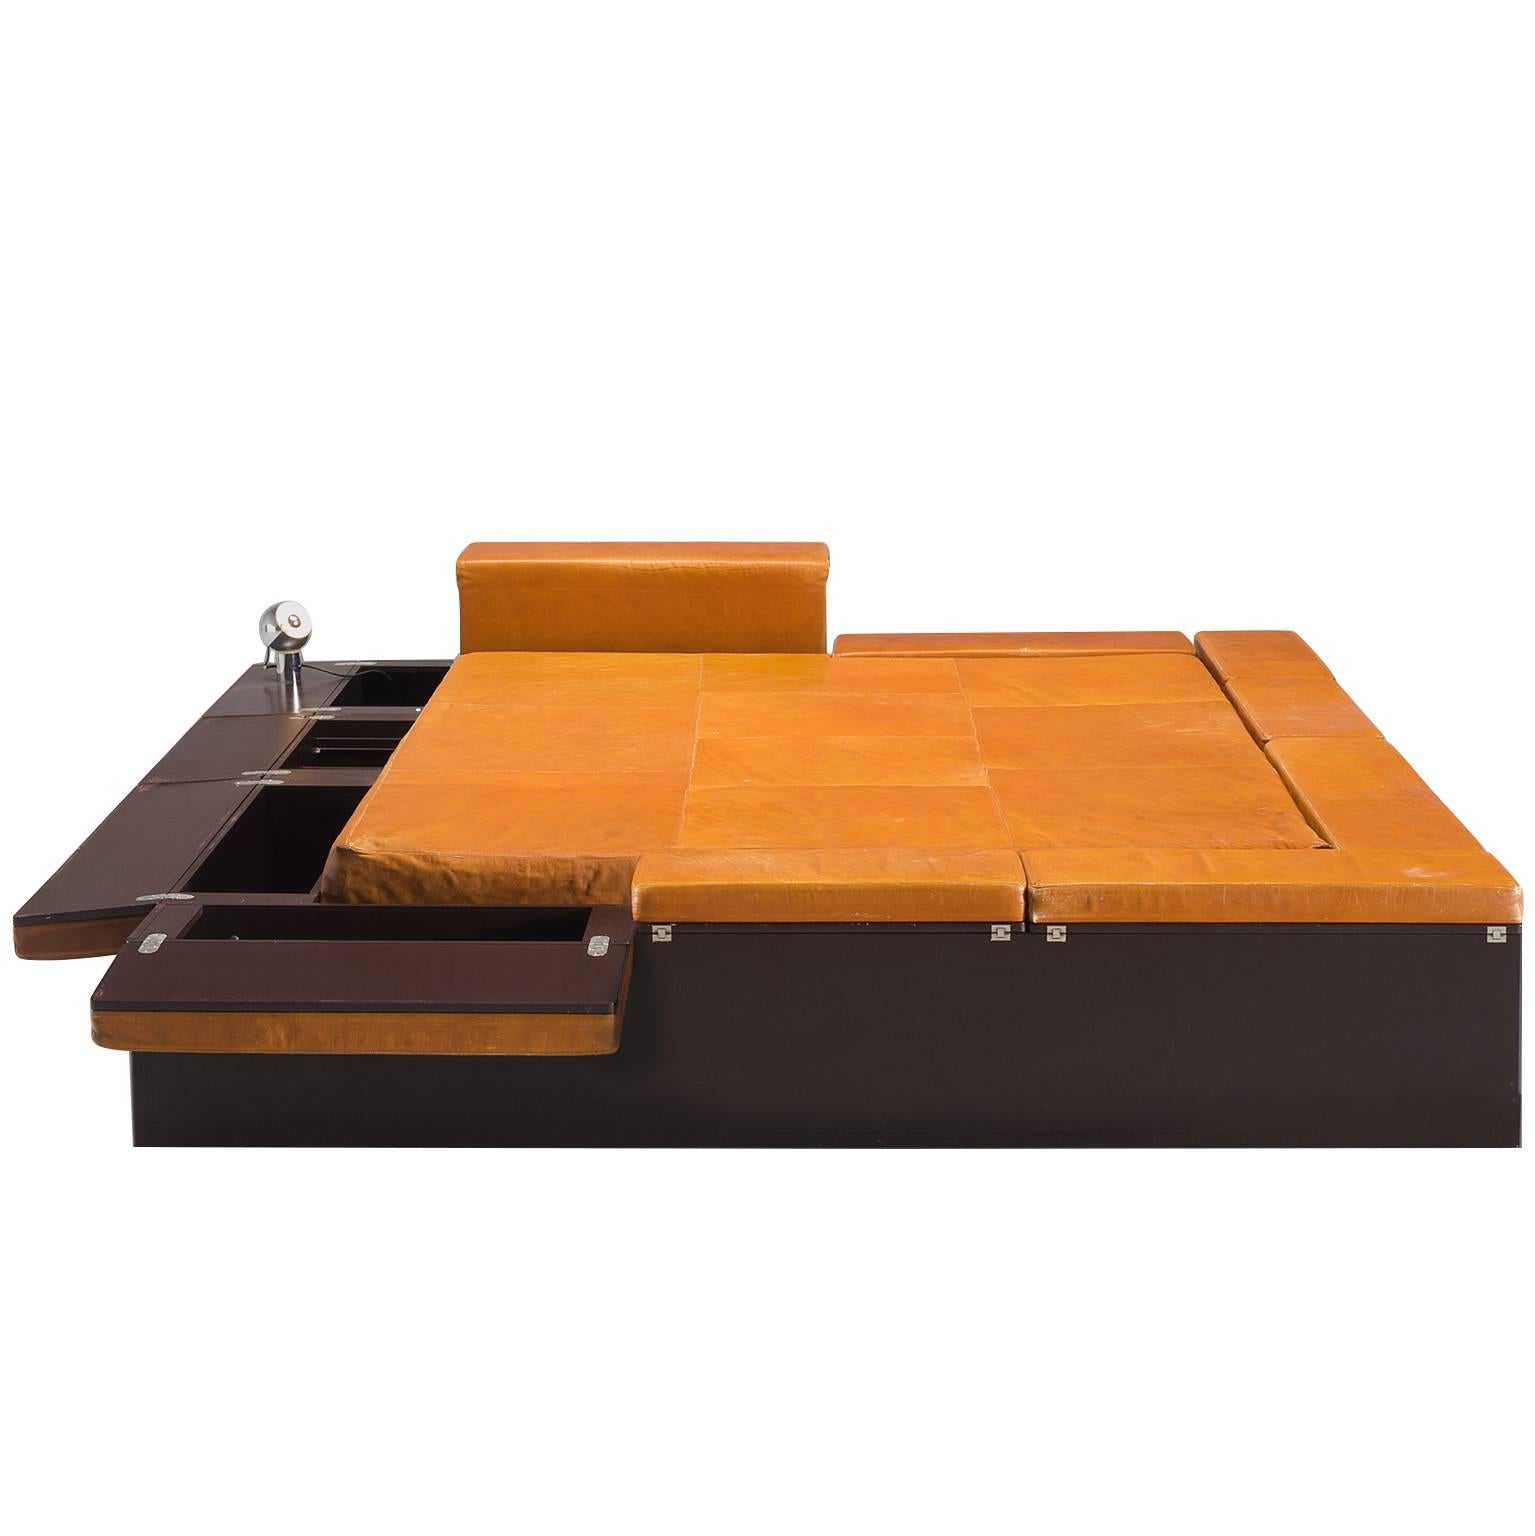 Italian Cognac Leather Bed with Goffredo Reggiani Lamps